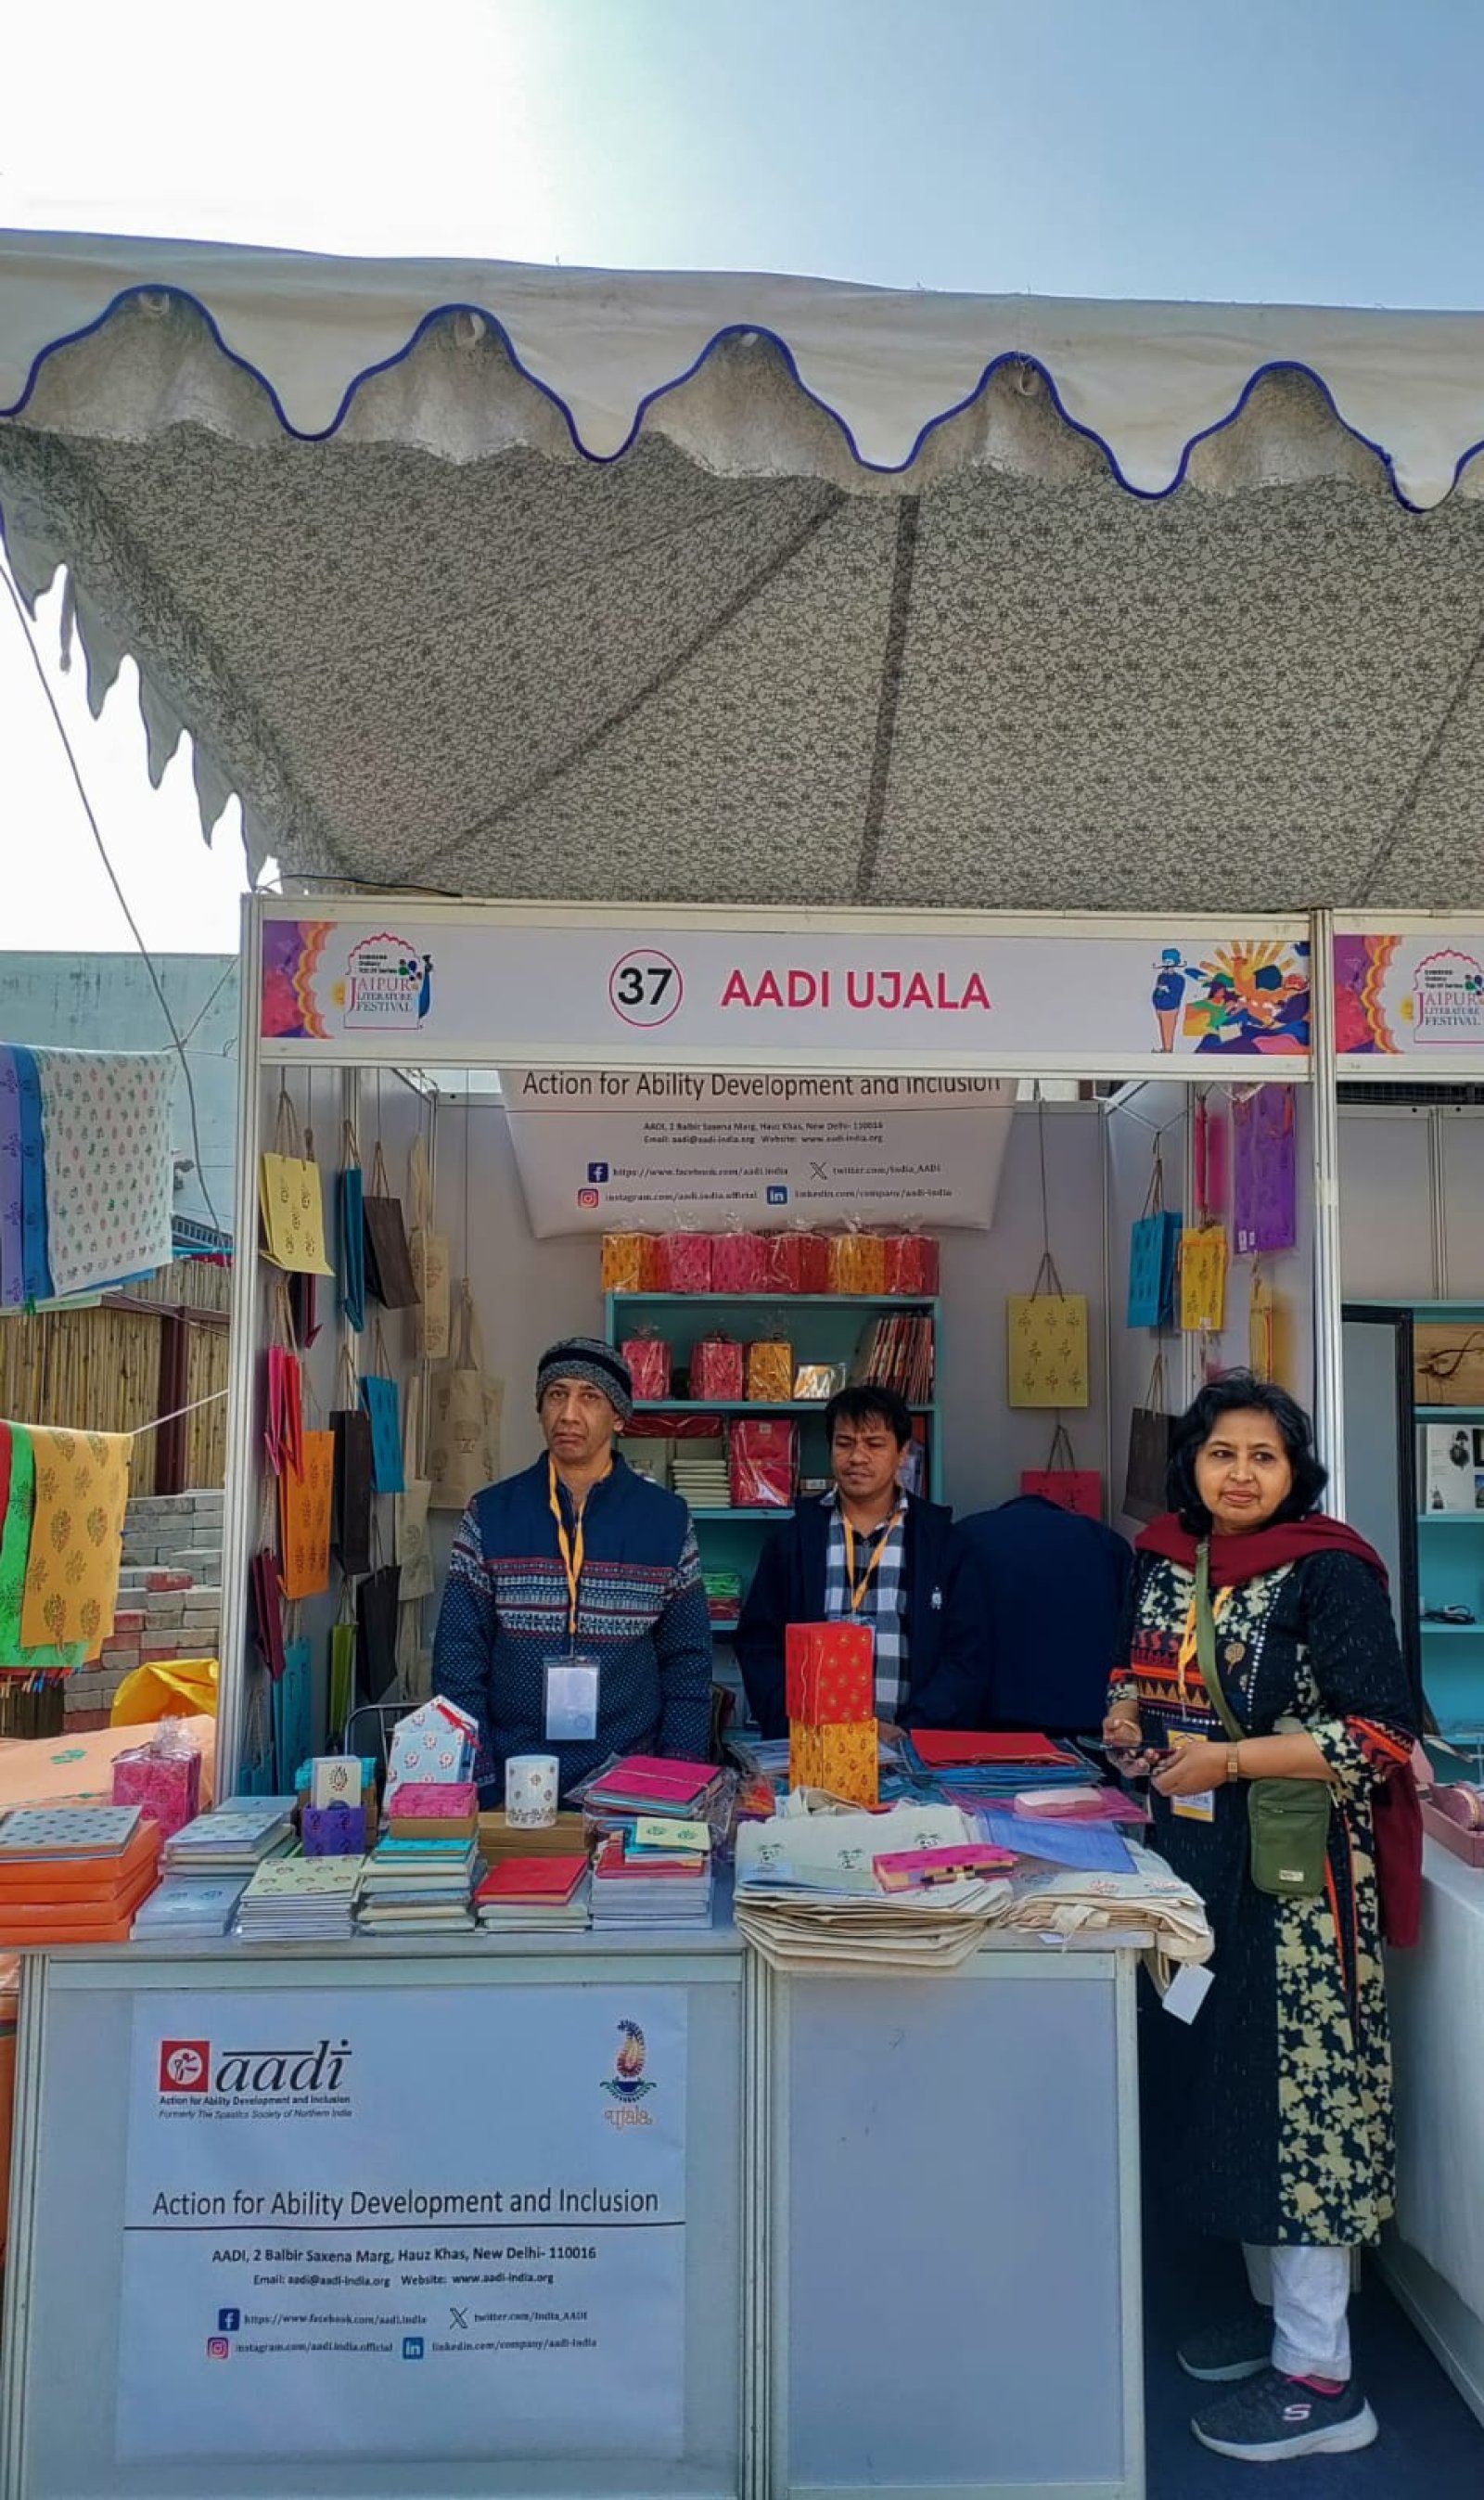 HANDMADE PRODUCTS BY DIFFERENTLY ABLED PEOPLE DRAW CROWDS AT JLF